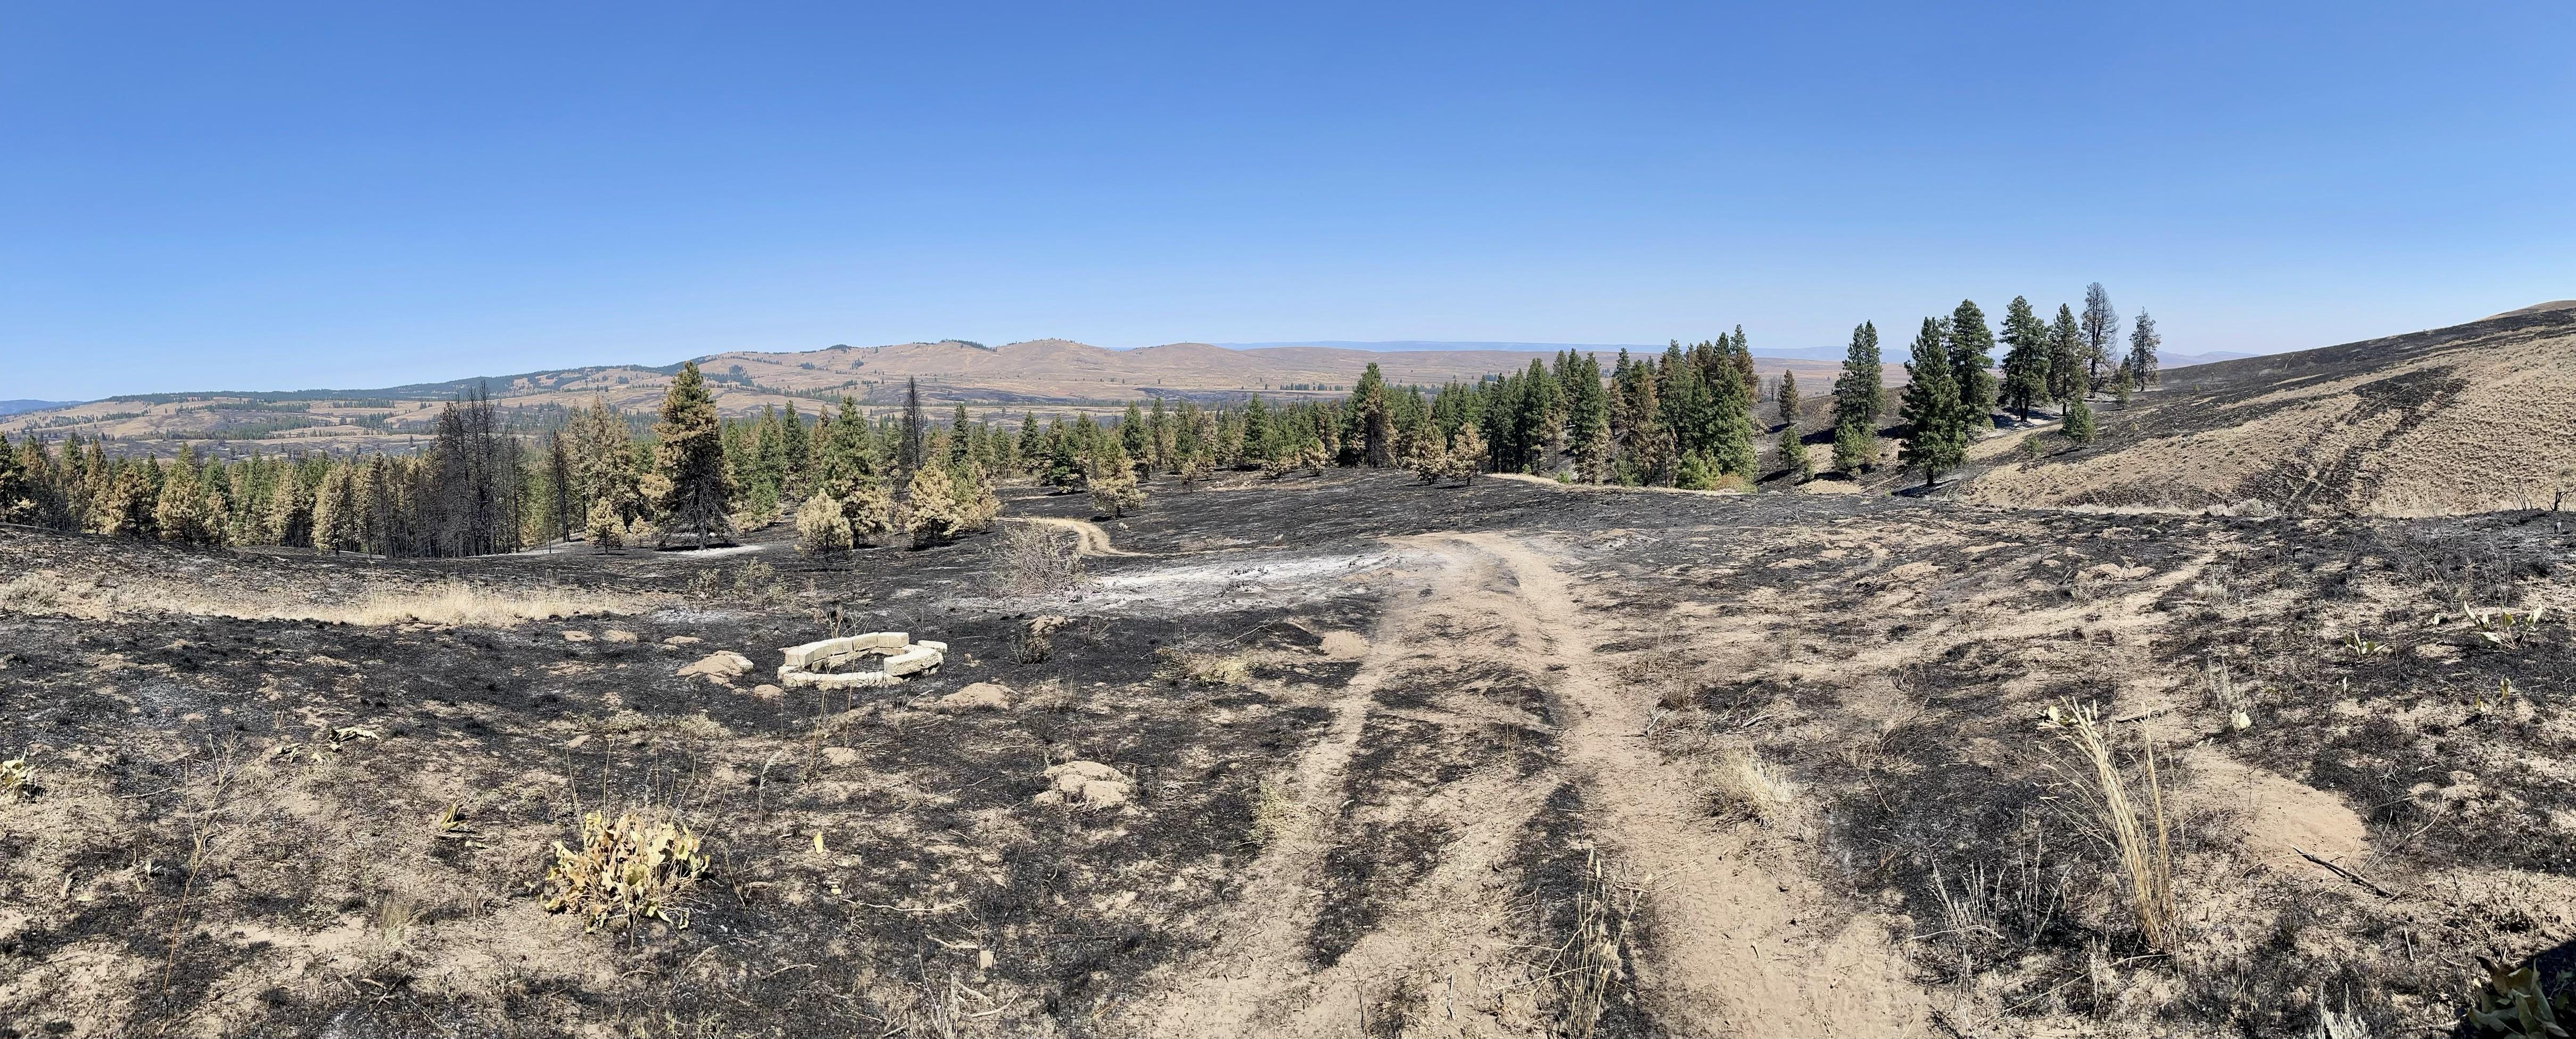 This area of the fire has cooled down and a charred black landscape remains. The fire moved quickly through the grass and ground fuels and continued to push into the Ponderosa pine stand.